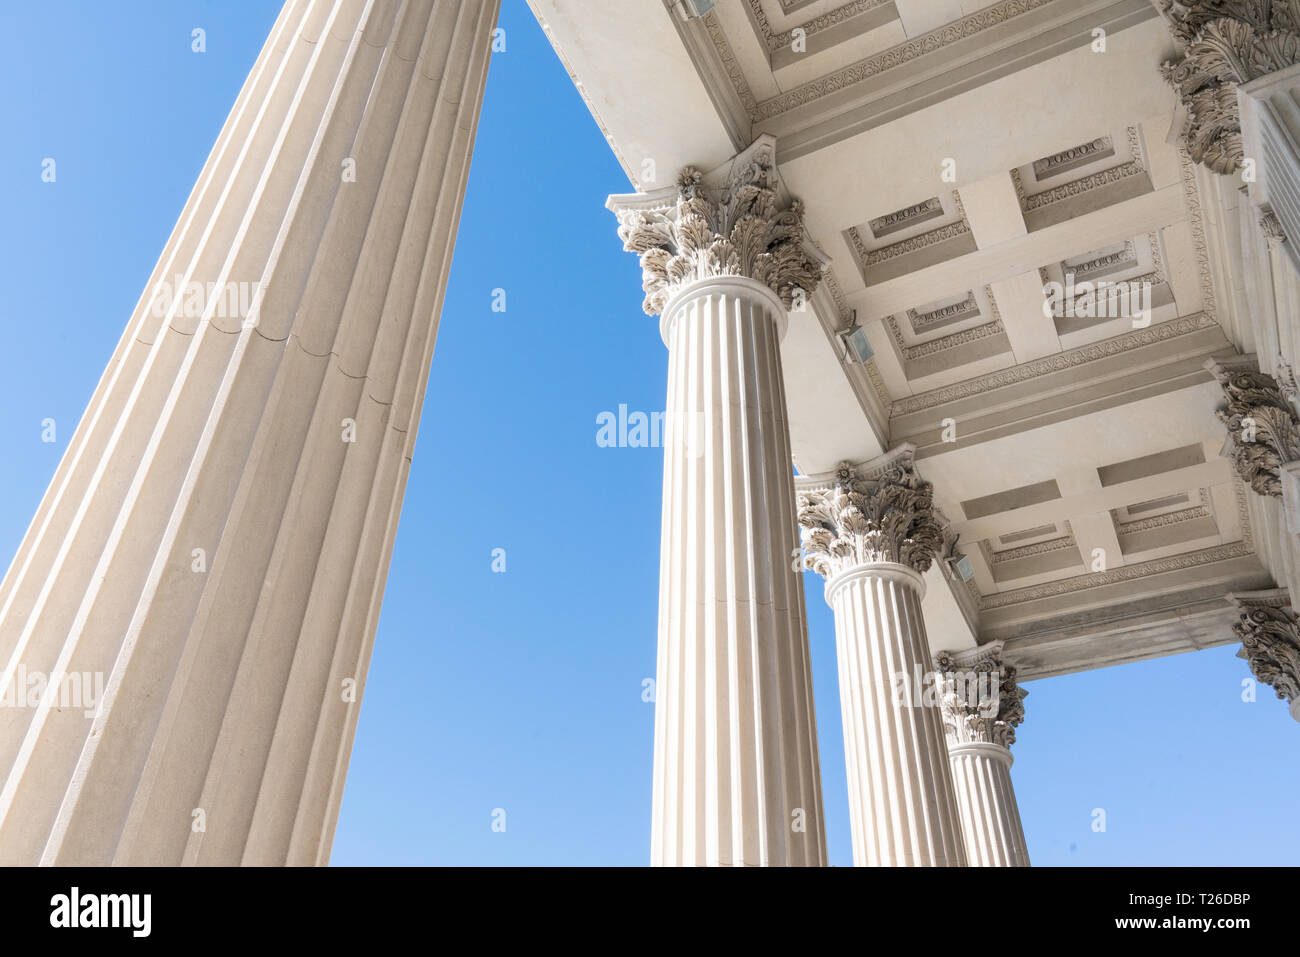 Top Detail of Stone Greek Revival Architectural Columns Stock Photo